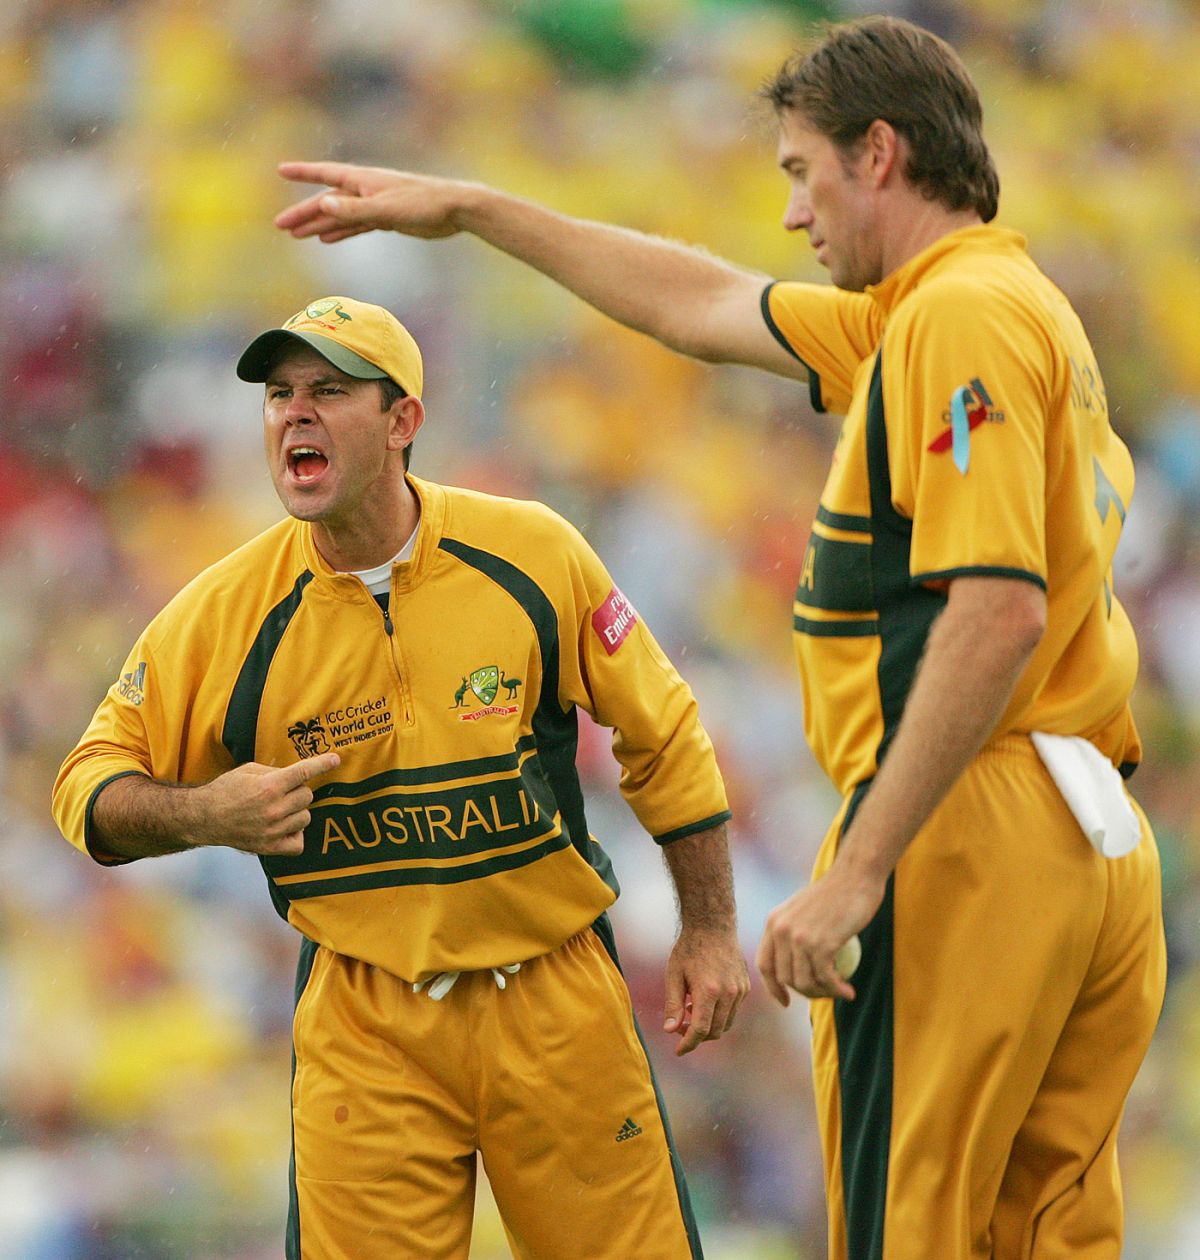 Glenn Mcgrath alongwith Ricky Ponting during a match